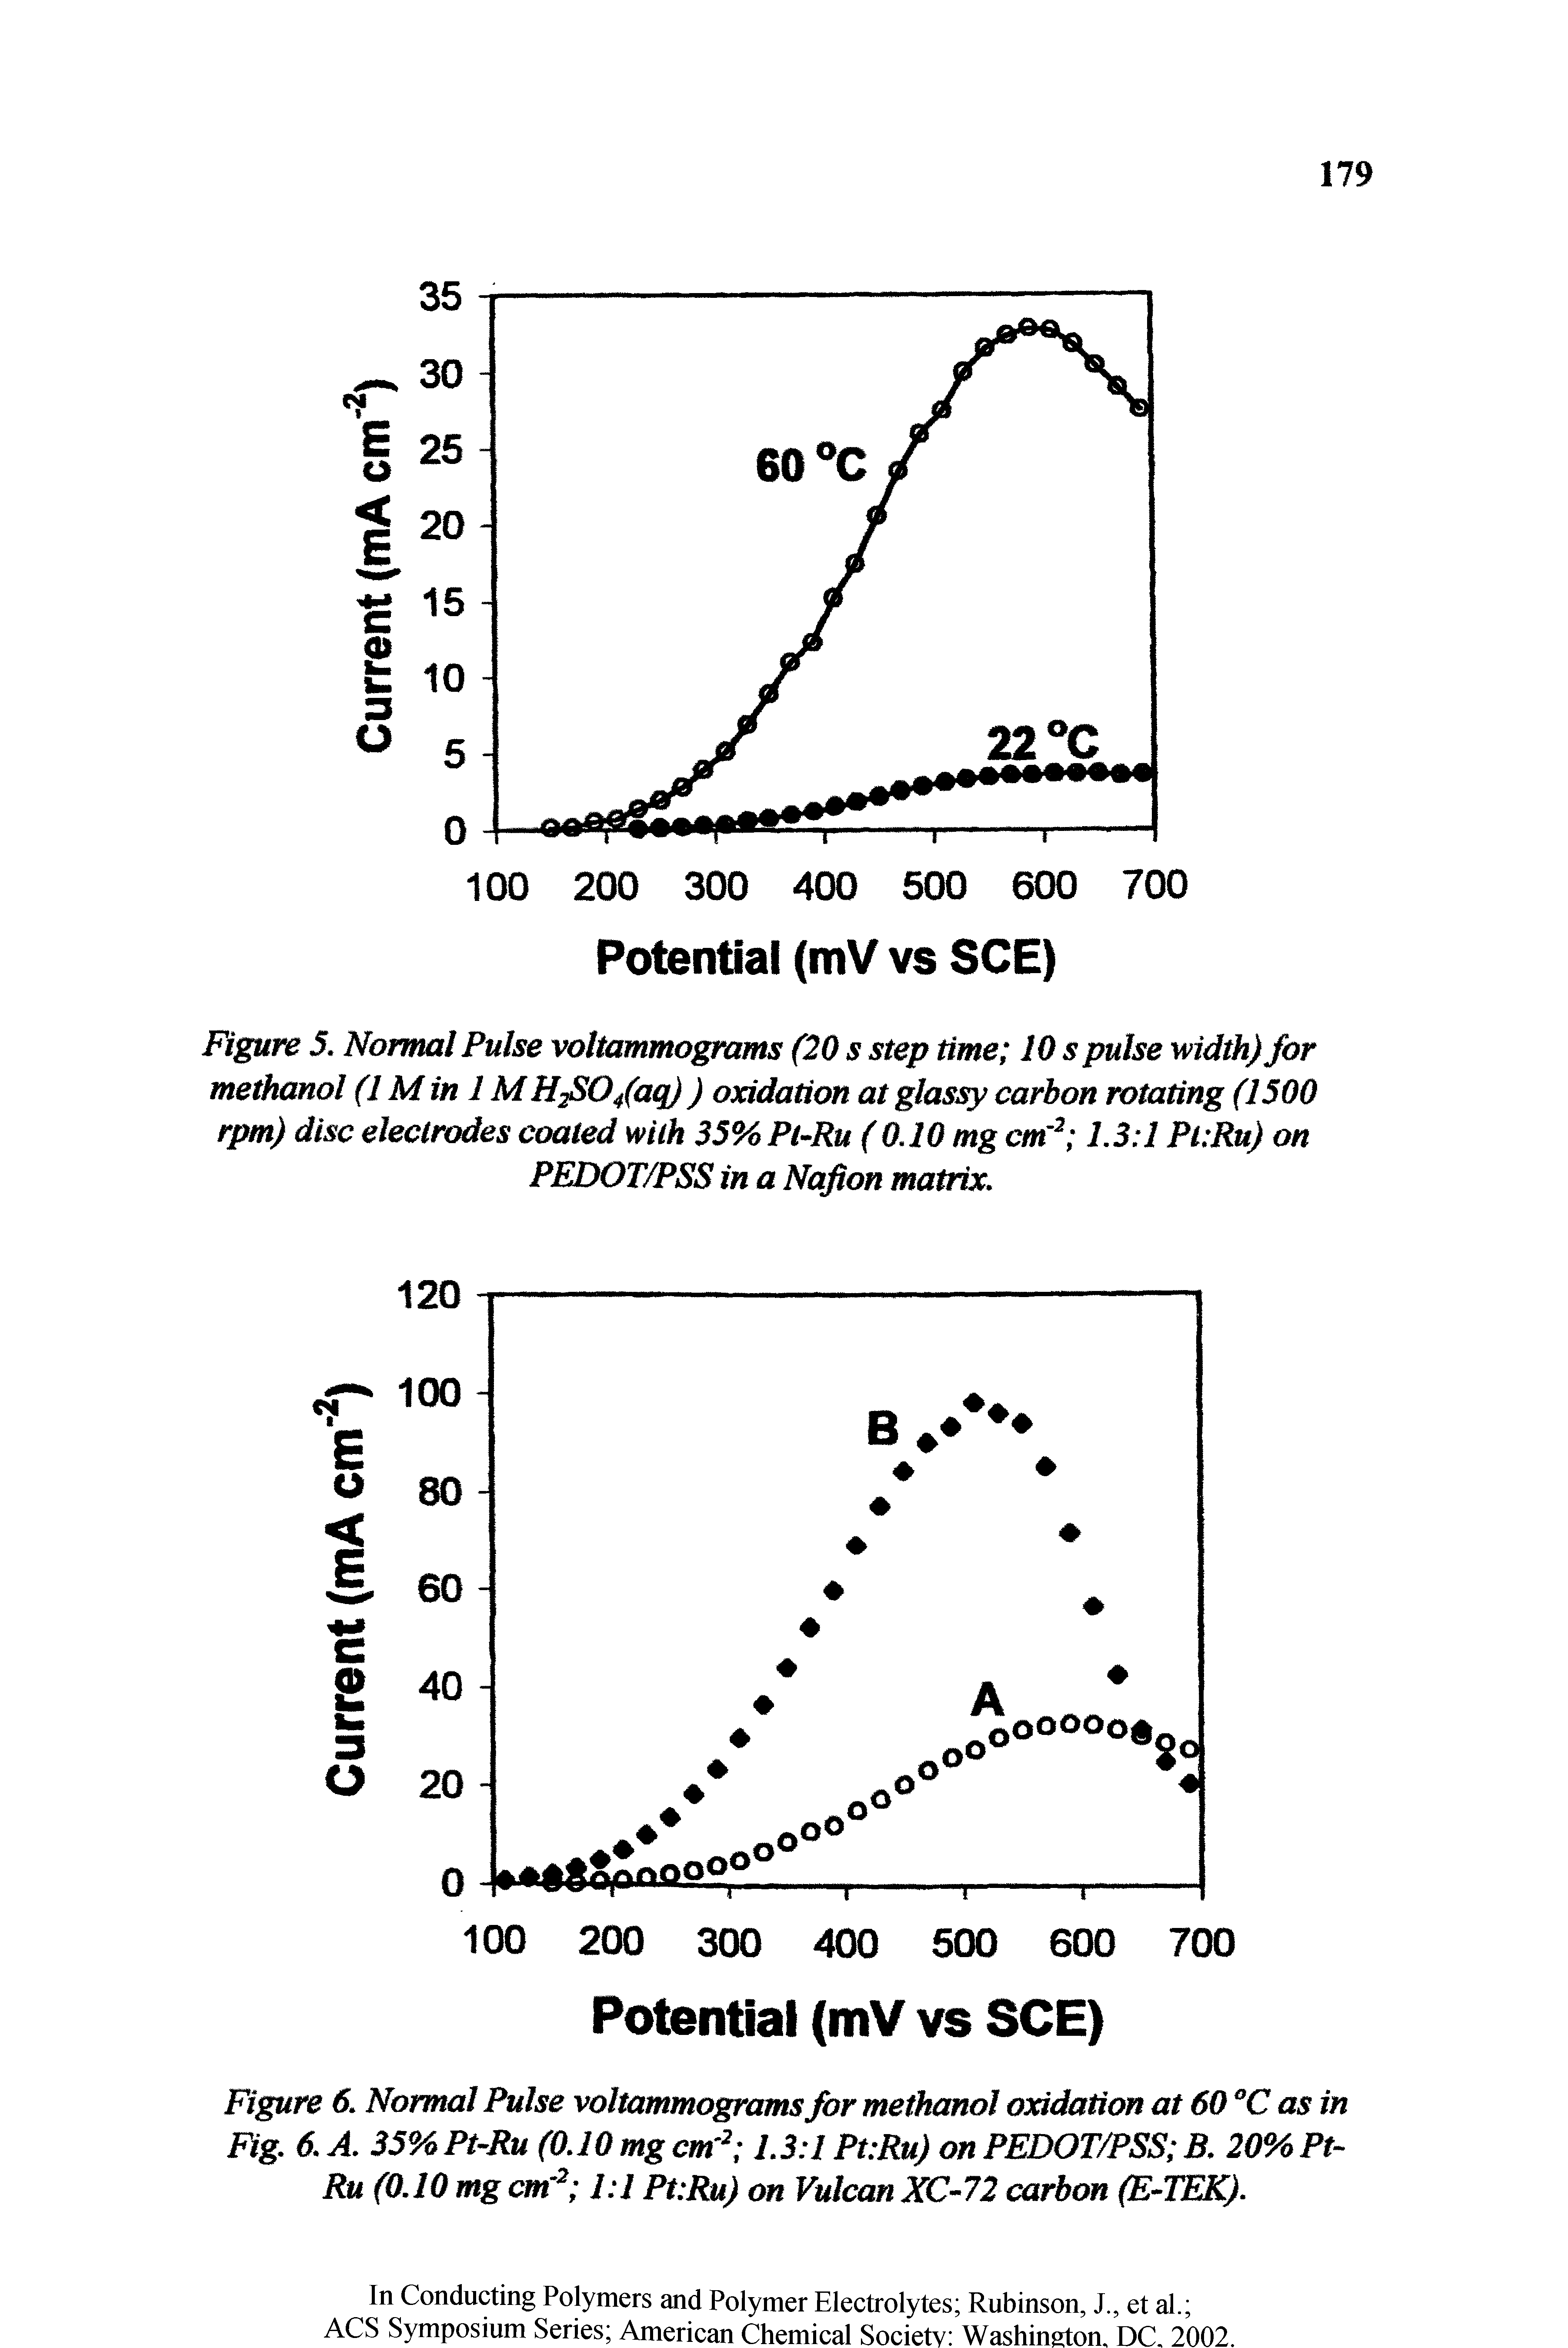 Figure 5. Normal Pulse voltammogram (20 s step time 10 s pulse width) for methanol (IMin IM H O/aq)) oxidation at glassy carbon rotating (1500 rpm) disc eleclrwies coated with 35%Pi-Ru (0.10 mg cmr 1.3 1 Pt.Ru) on PEDOT/PSS in a Nafion matrix.